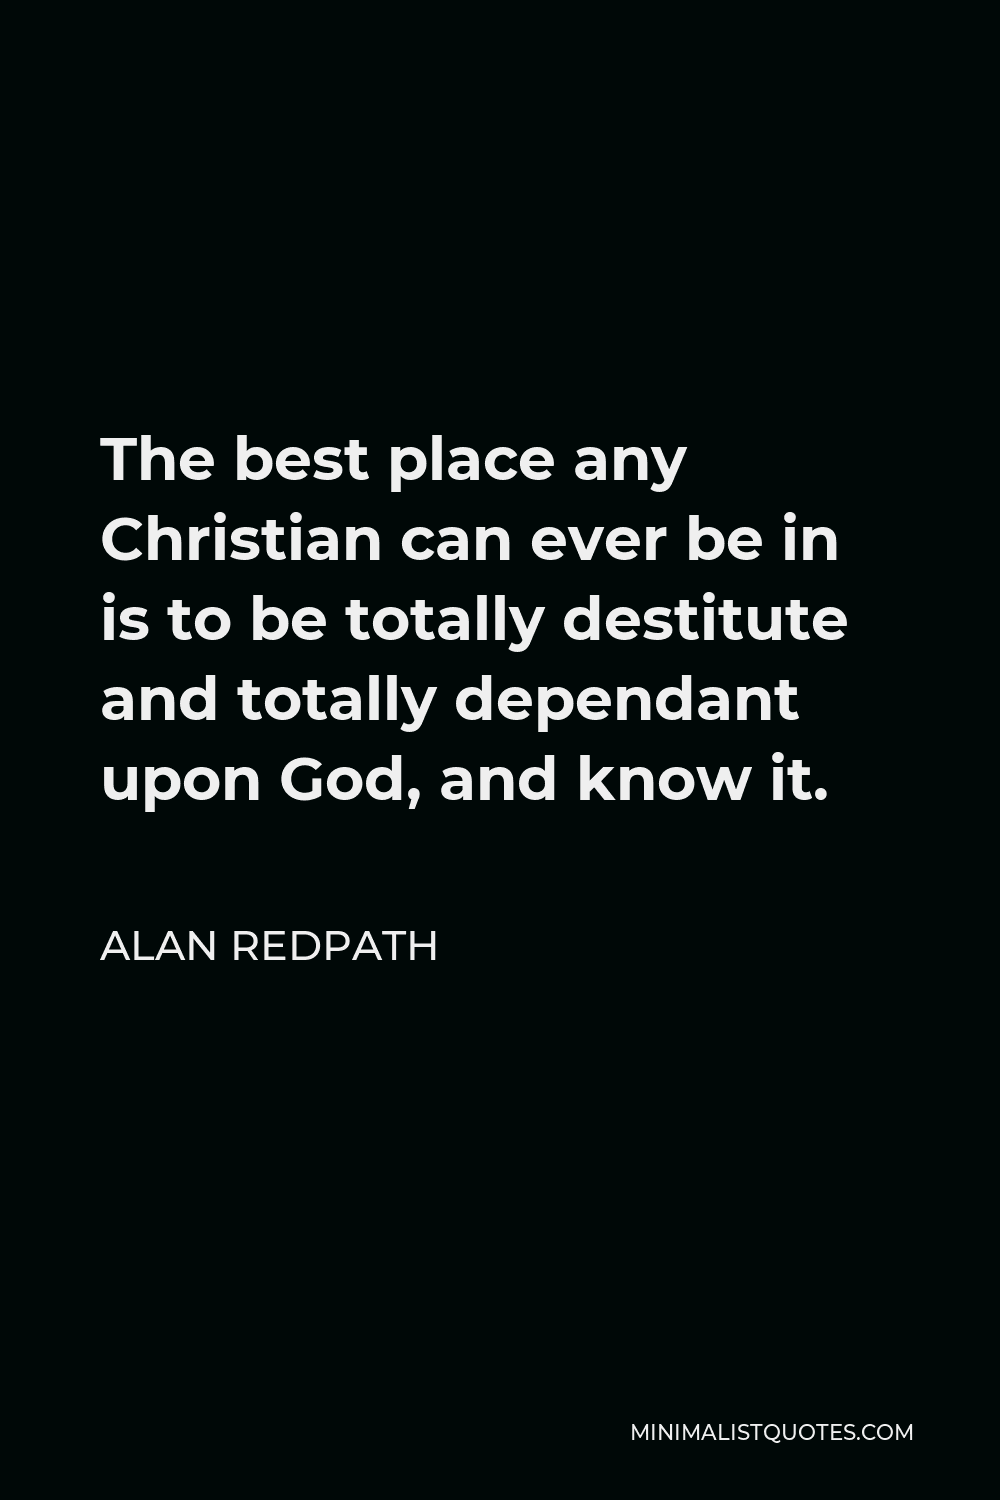 Alan Redpath Quote - The best place any Christian can ever be in is to be totally destitute and totally dependant upon God, and know it.